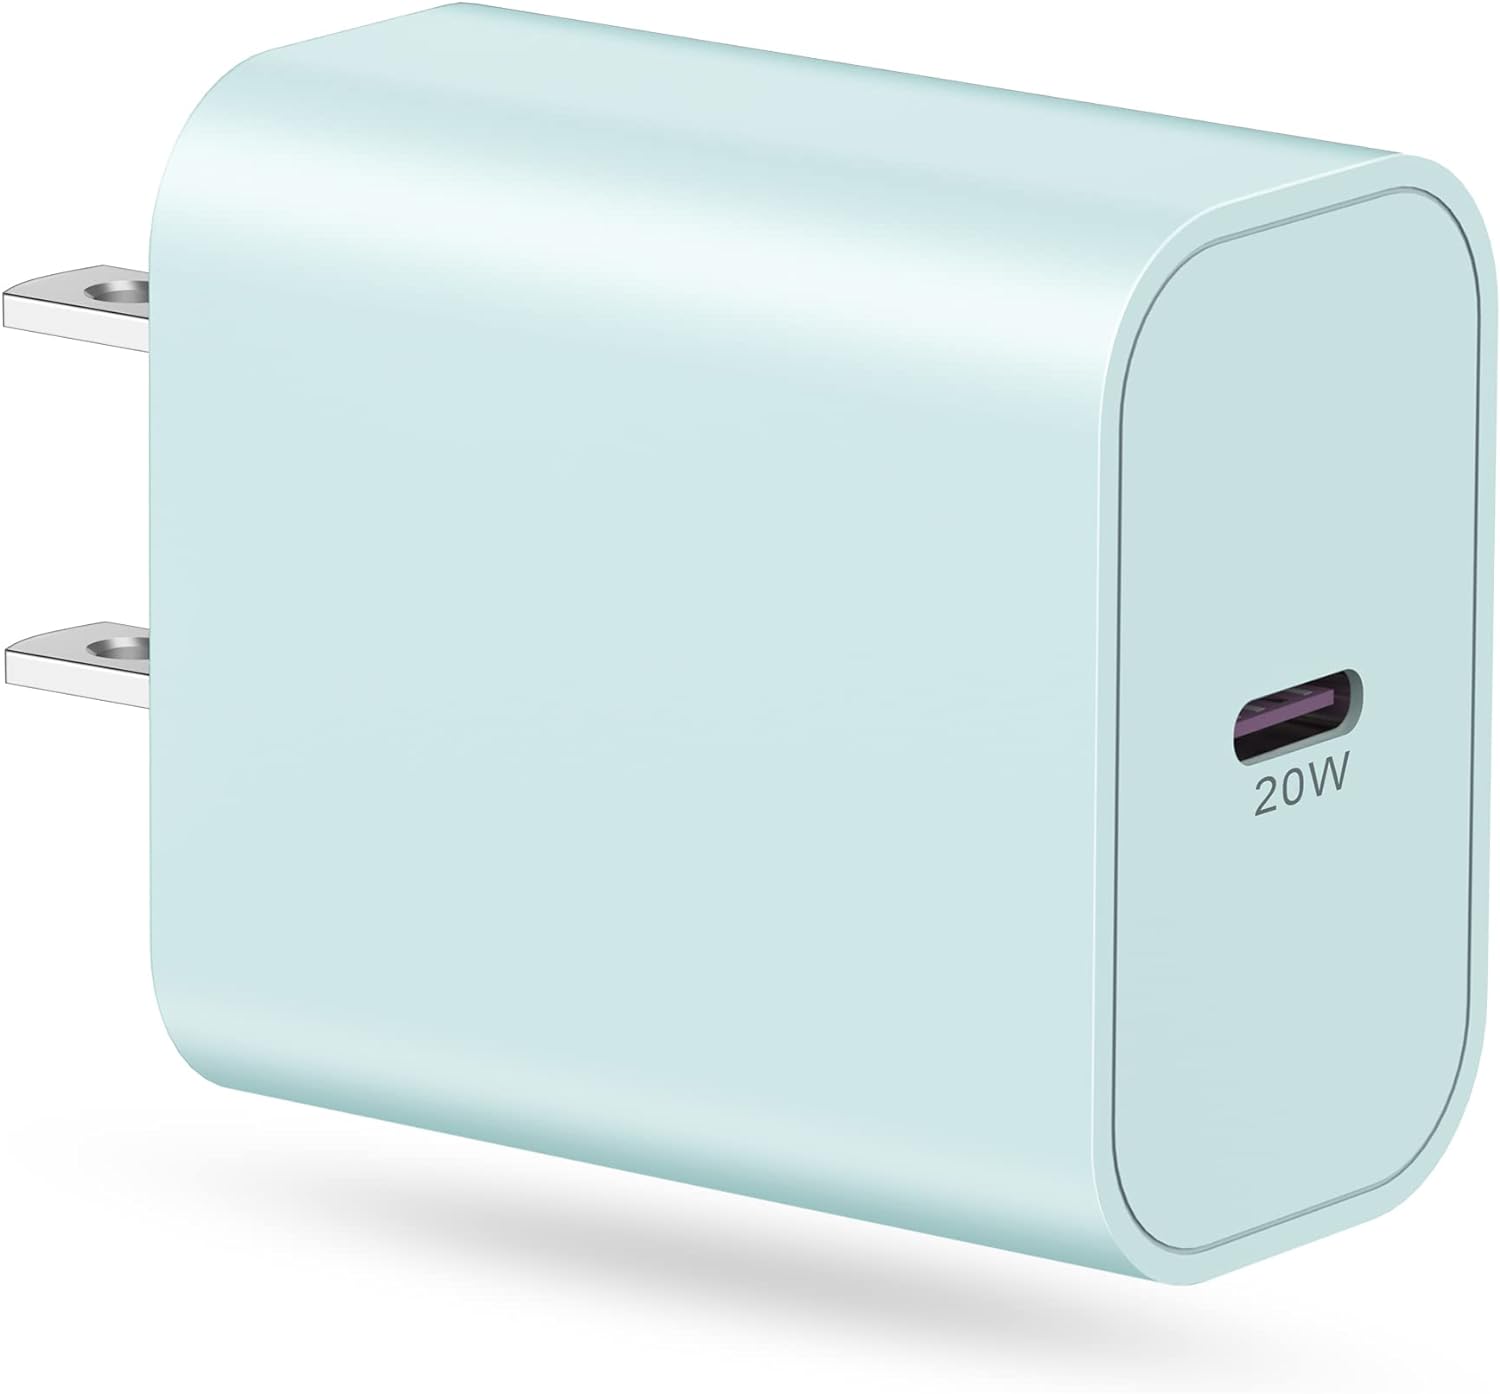 iPhone Charger Block, 20W USB C Fast Wall Plug Type C Power Adapter Brick Cube Charging for iPhone 15 Pro Max/15 Pro/15/14 Pro Max/14 Pro/14 Plus/14/13 Mini/12/11/SE3/XS/XR/X/8, iPad Air, AirPods